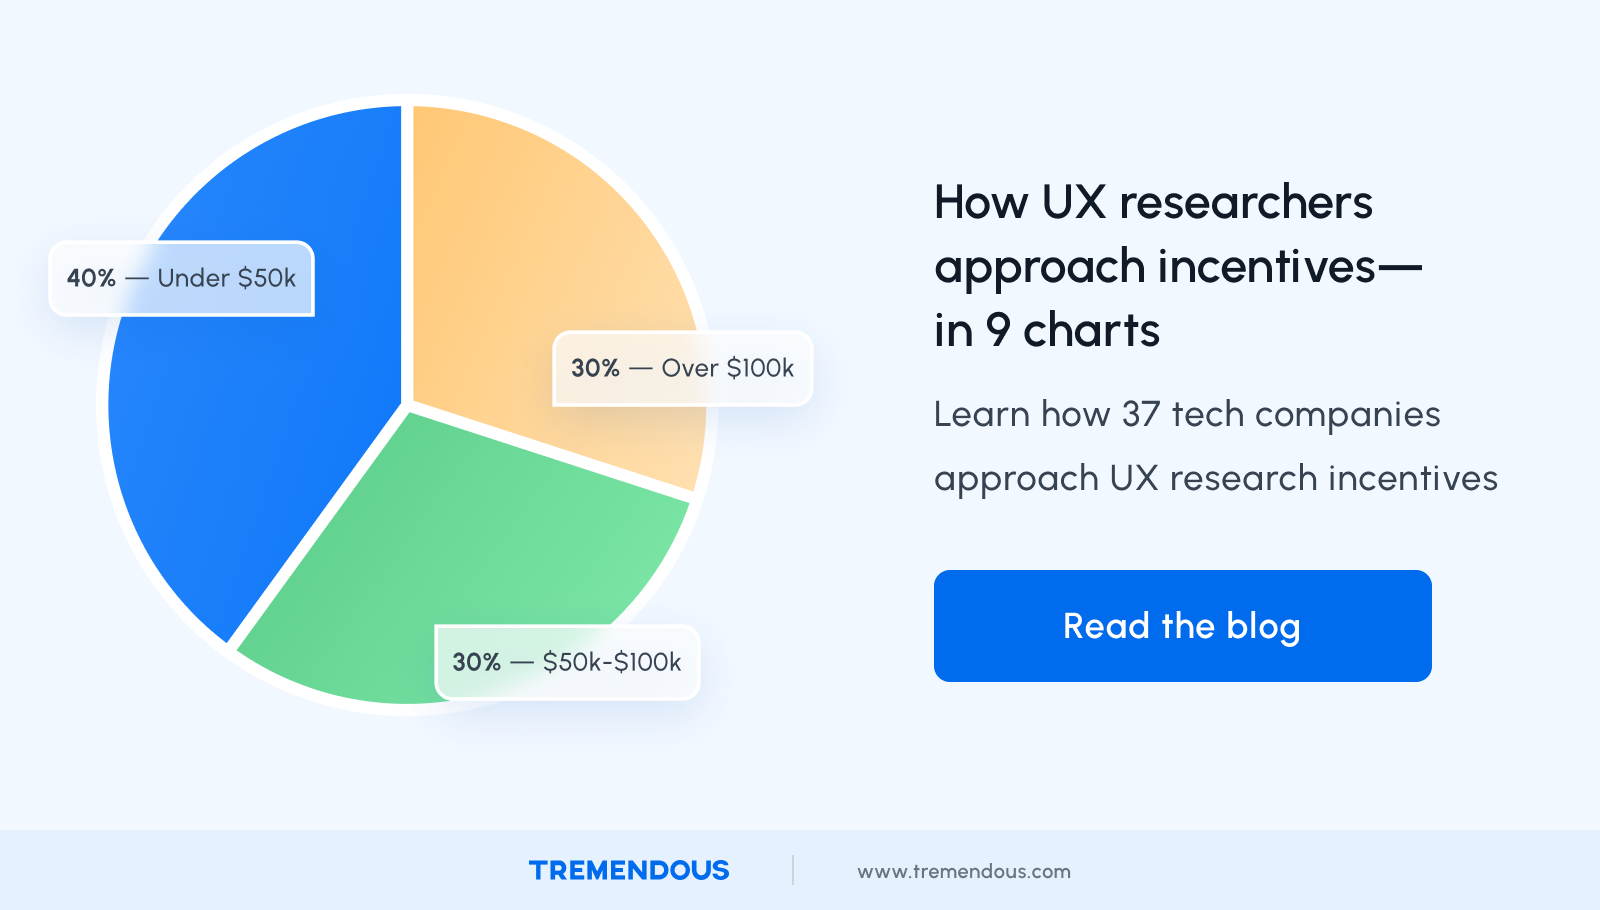 How UX researchers approach incentives - in 9 charts